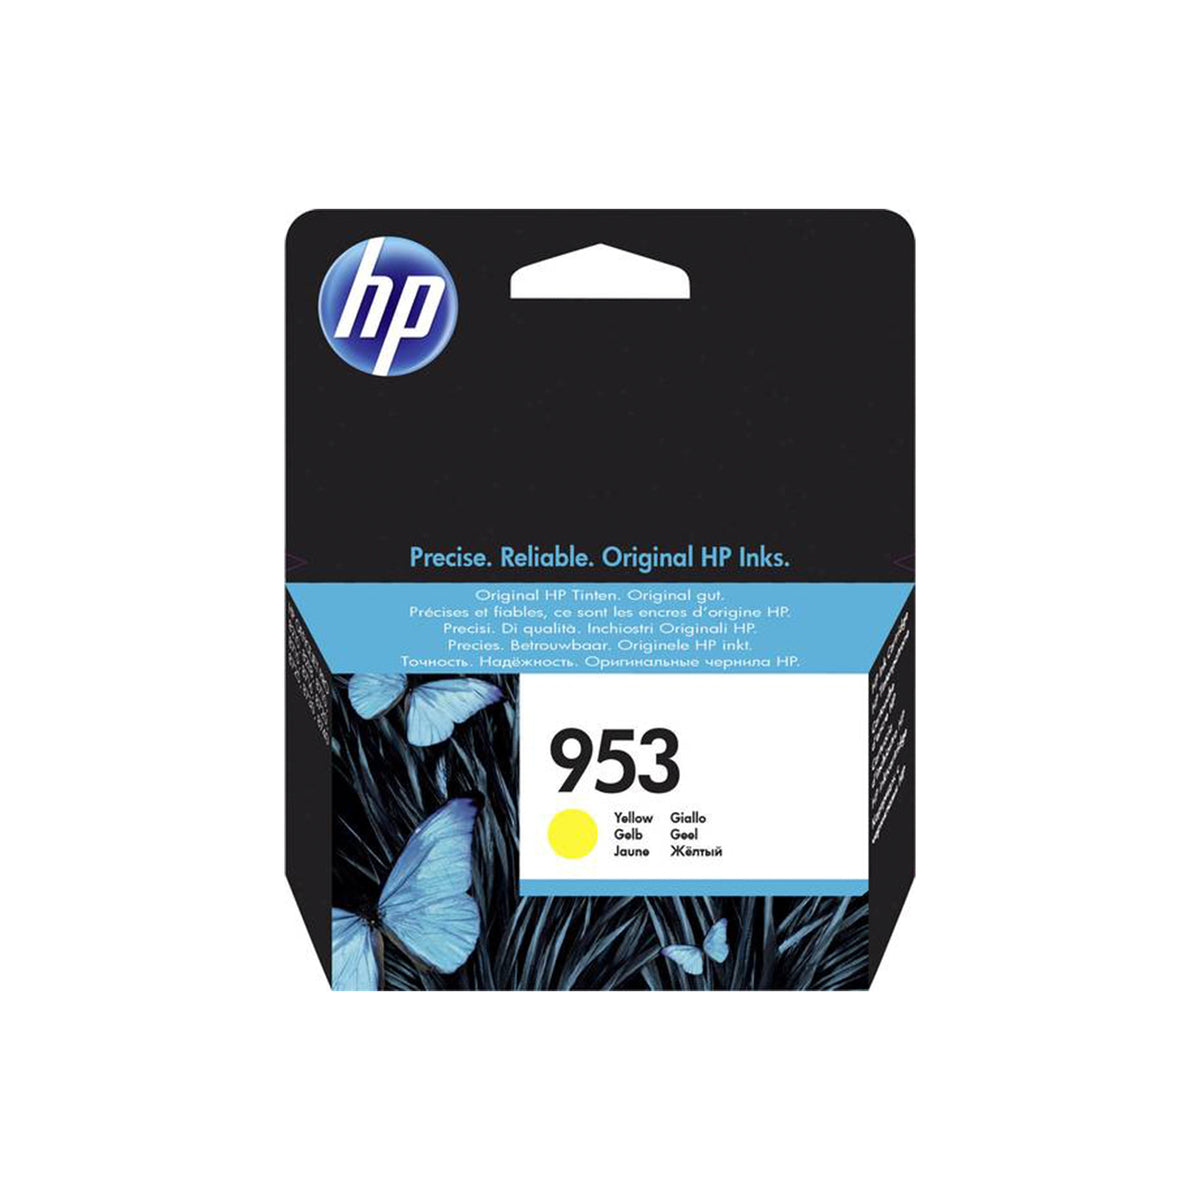 HP 953 Ink Cartridge for HP OfficeJet Pro 7740  and  8710